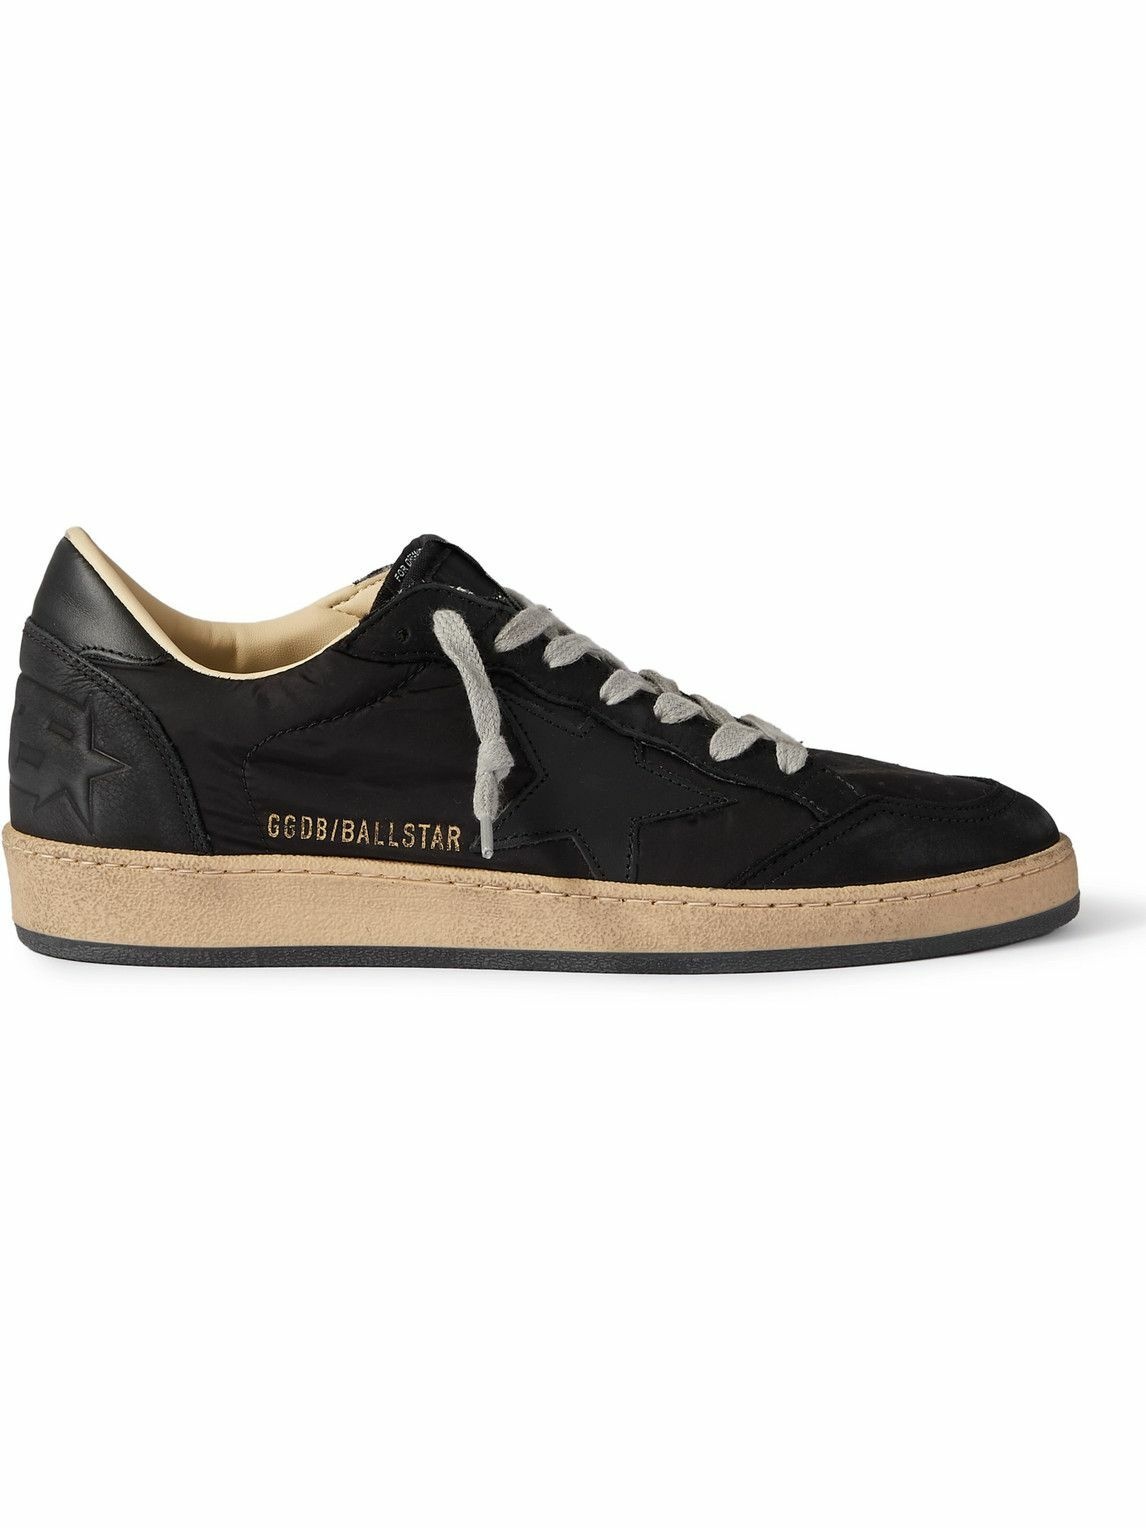 Golden Goose - Ball Star Distressed Nubuck and Leather-Trimmed Nylon ...